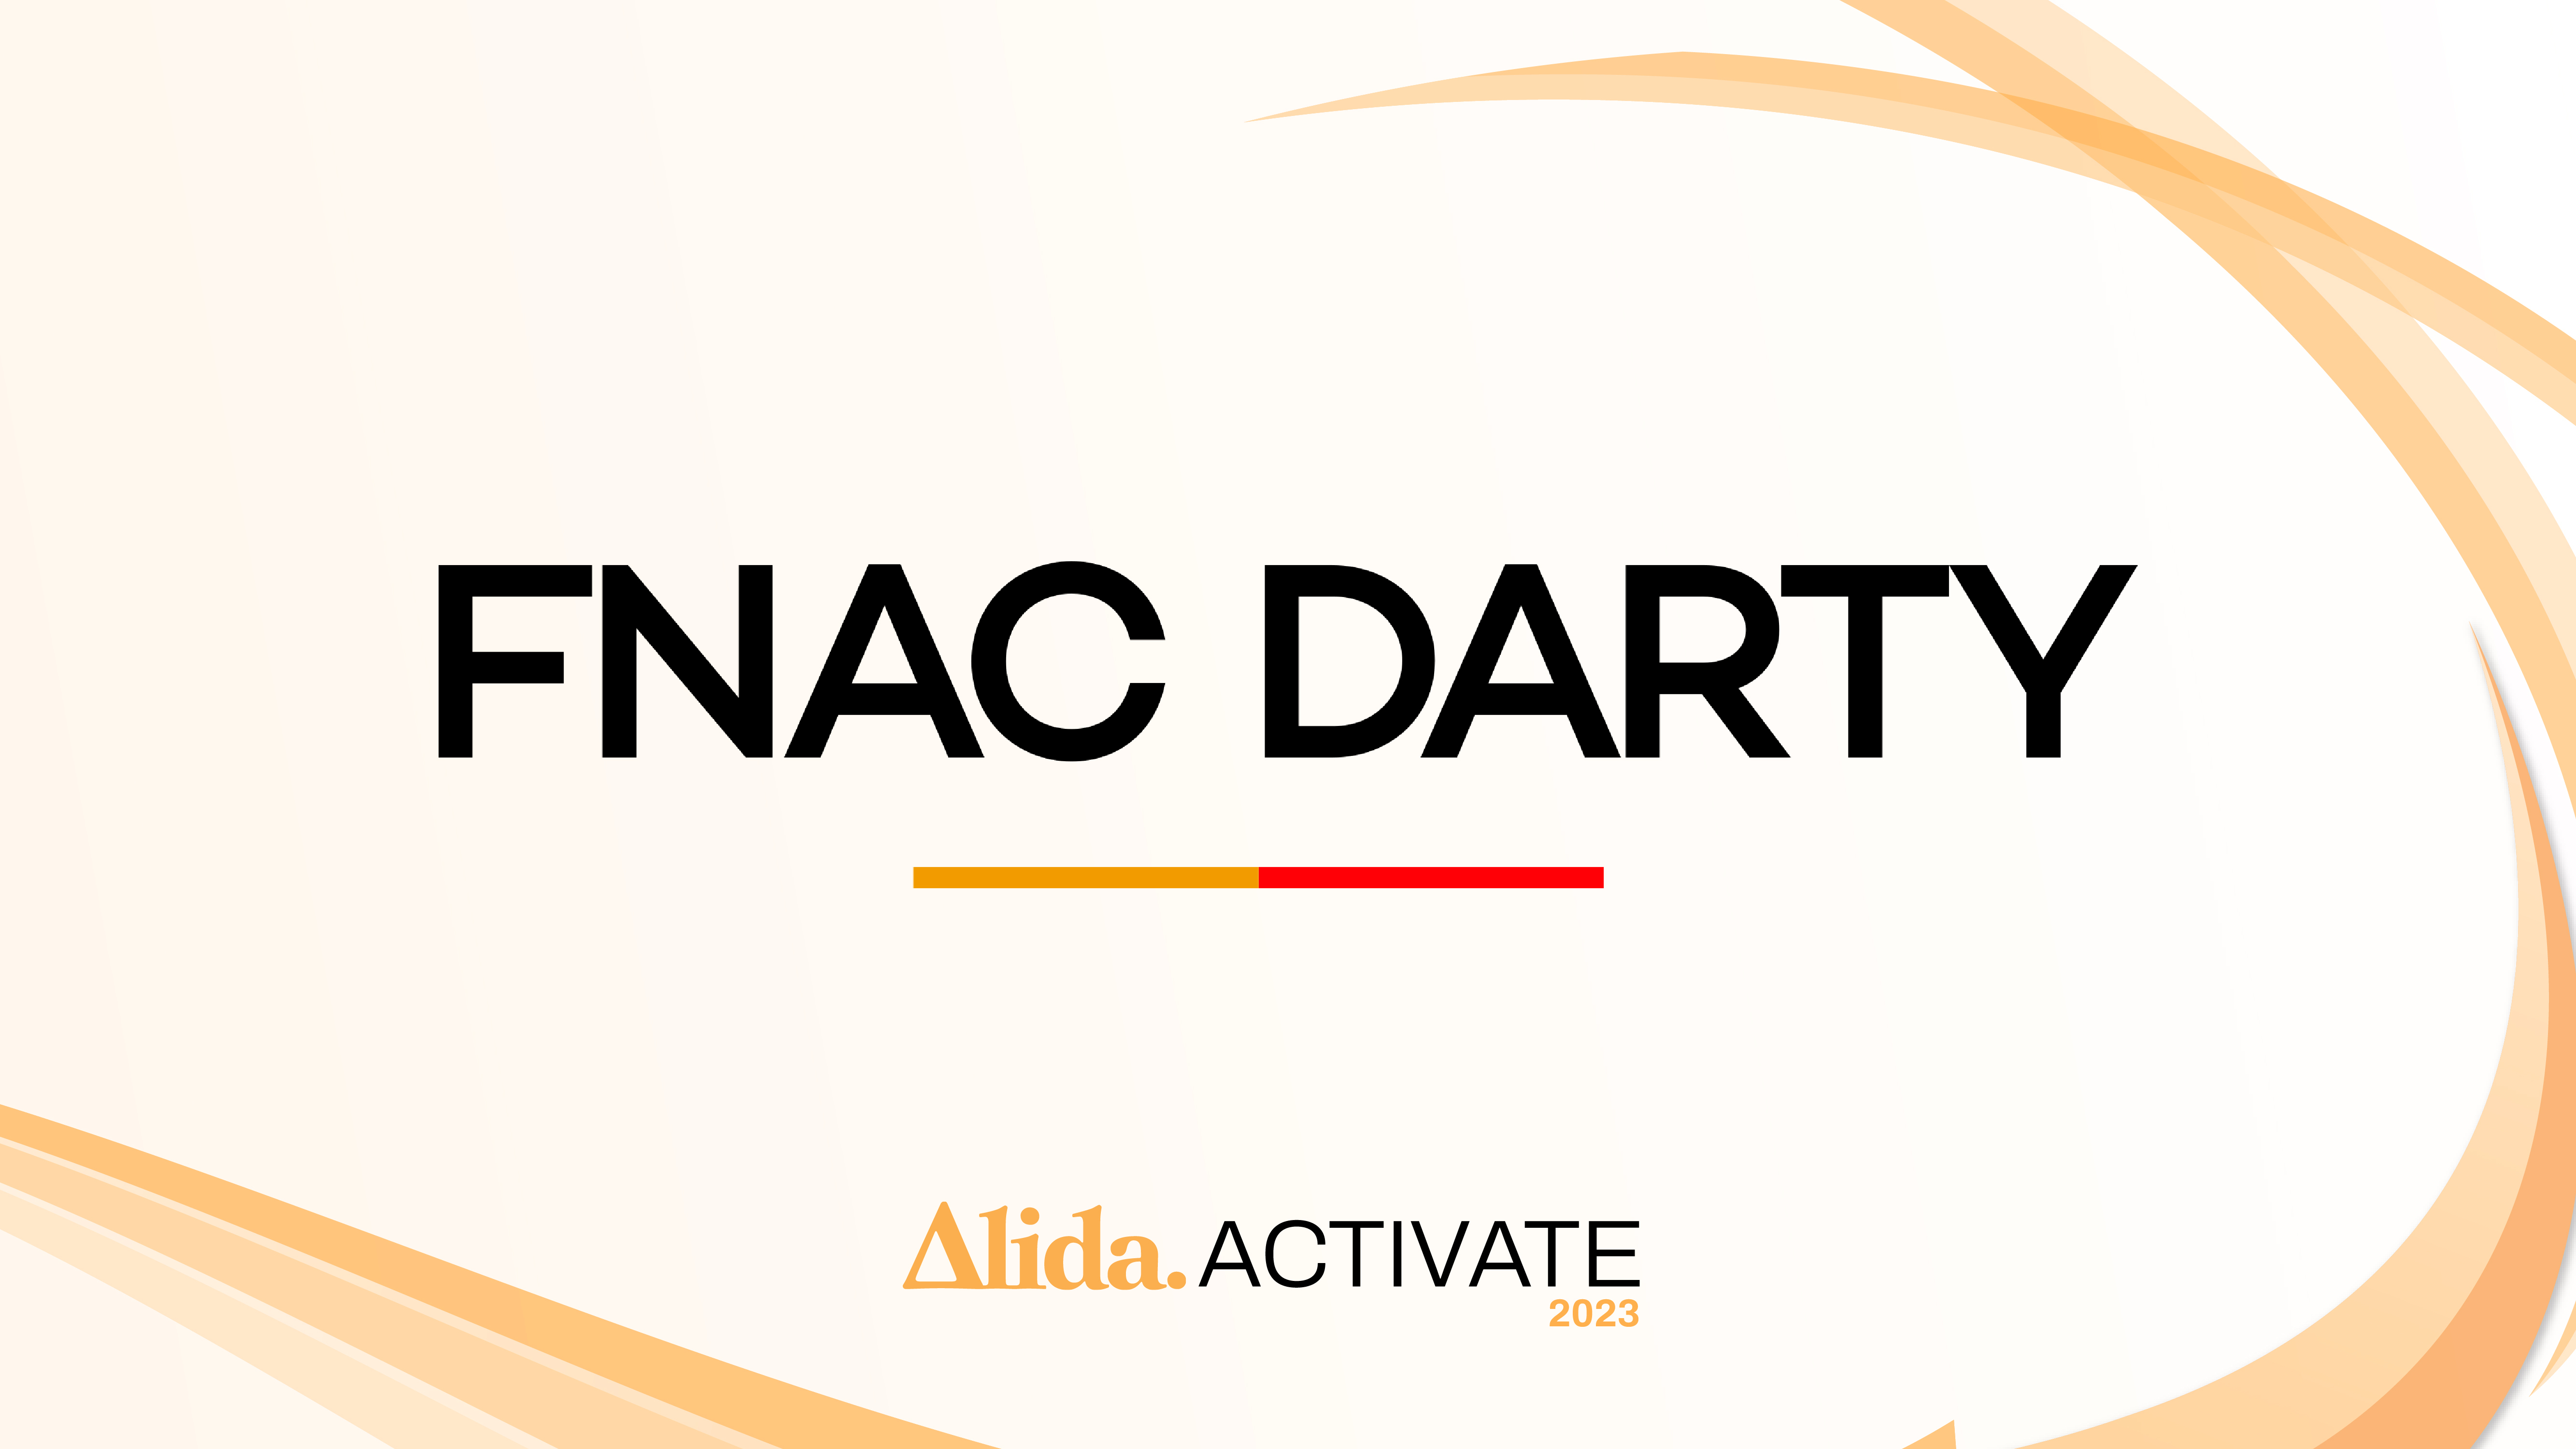 activate on demand fr_fnac darty